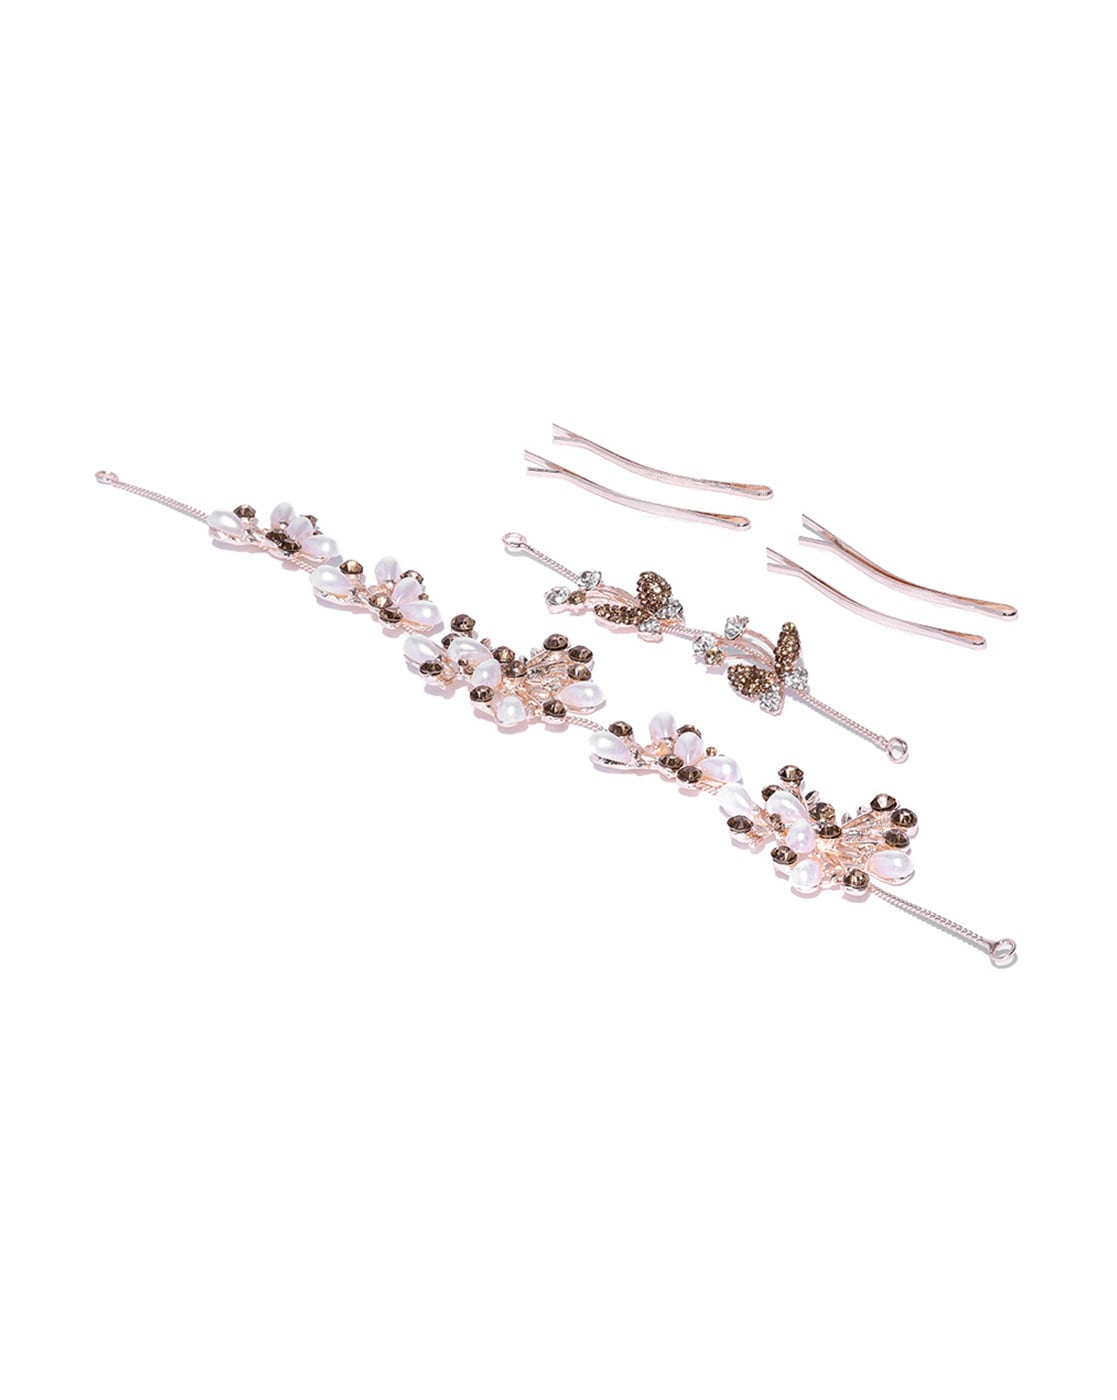 Wholesale Rose Gold Bridal Wedding Hair Accessories and Pink Gold Combs   Mariell